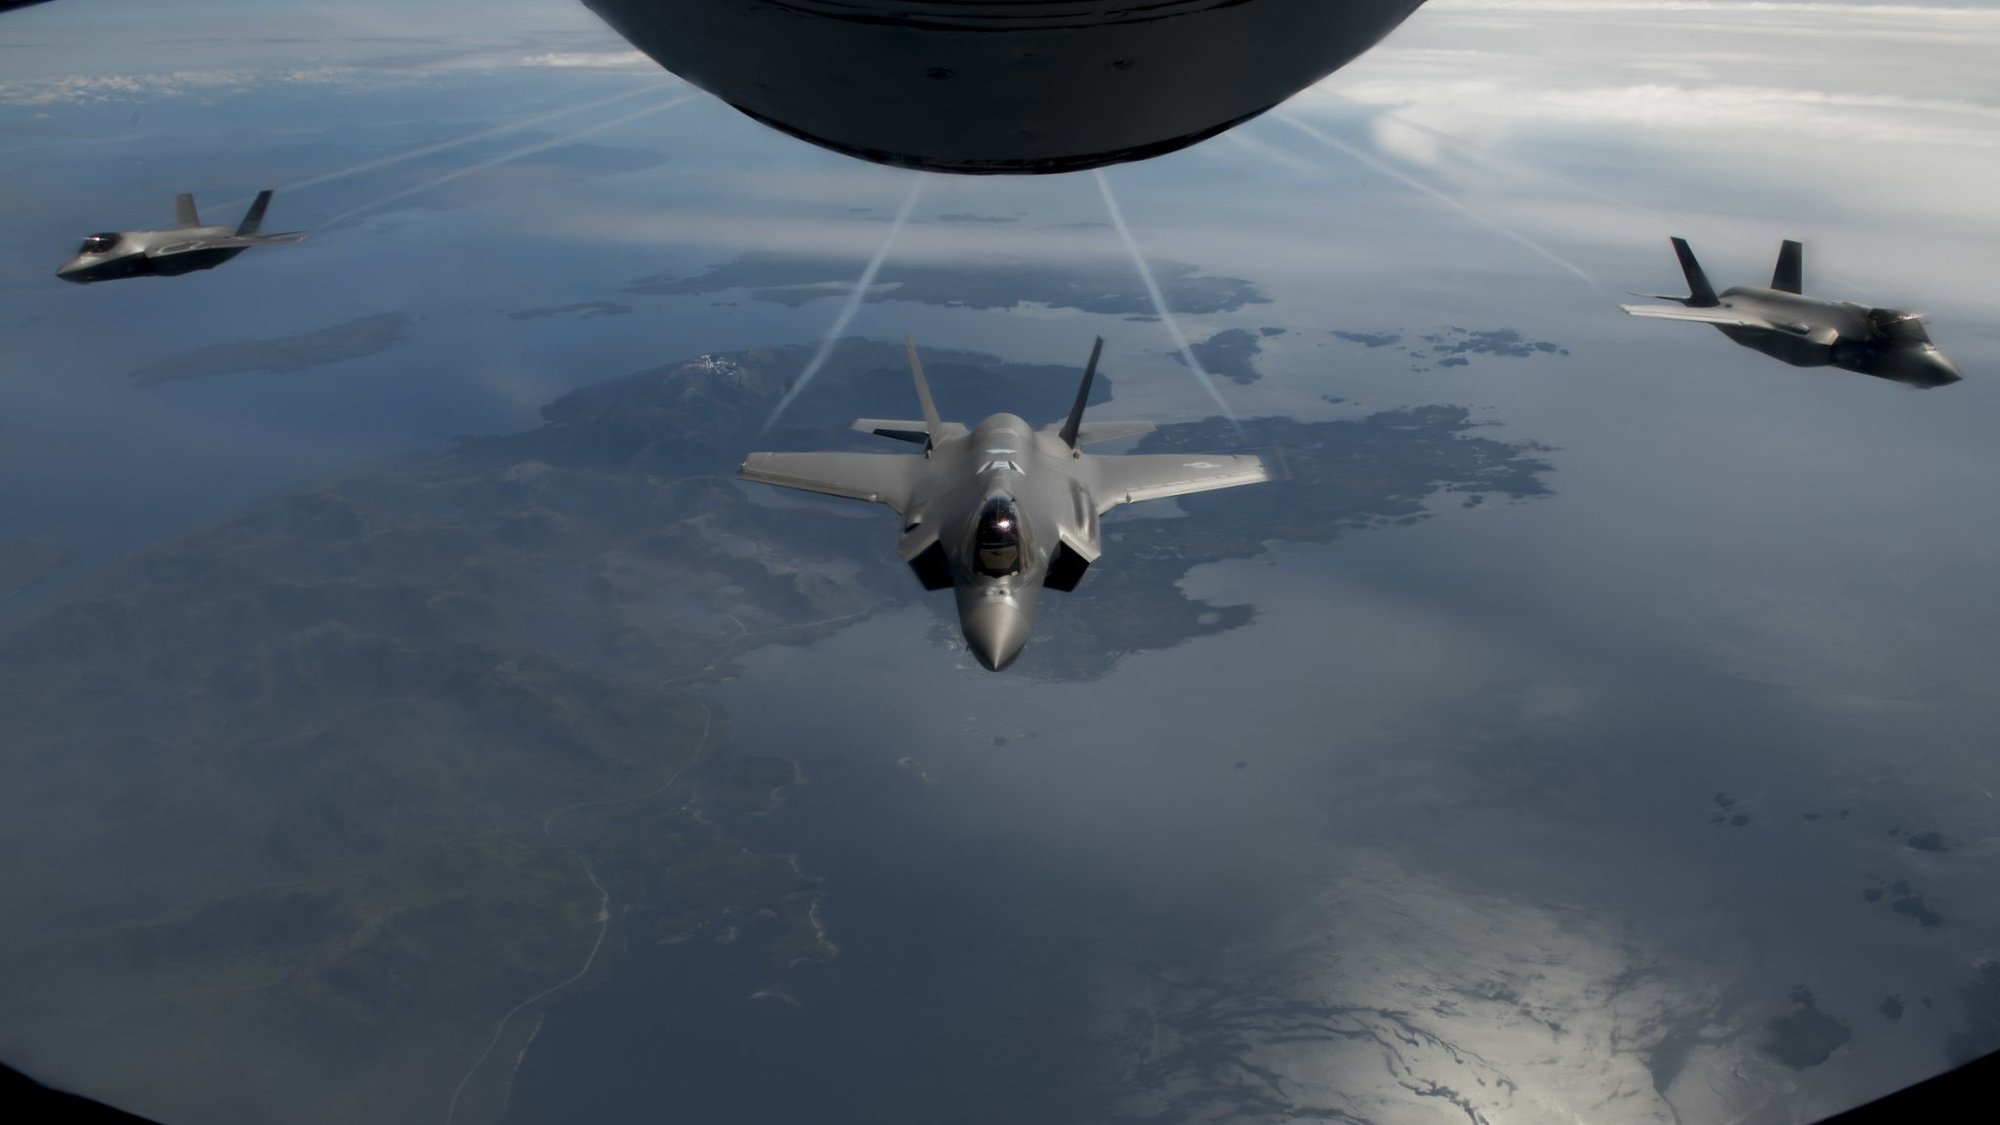 Three F-35 Lightning IIs fly in formation after being refueled by a KC-135 Stratotanker en route to Alaska, July 30, 2020. The F-35A is an agile, versatile, high-performance, 9g capable multirole fighter that combines stealth, sensor fusion, and unprecedented situational awareness. (U.S. Air Force photo by Senior Airman Lawrence Sena)